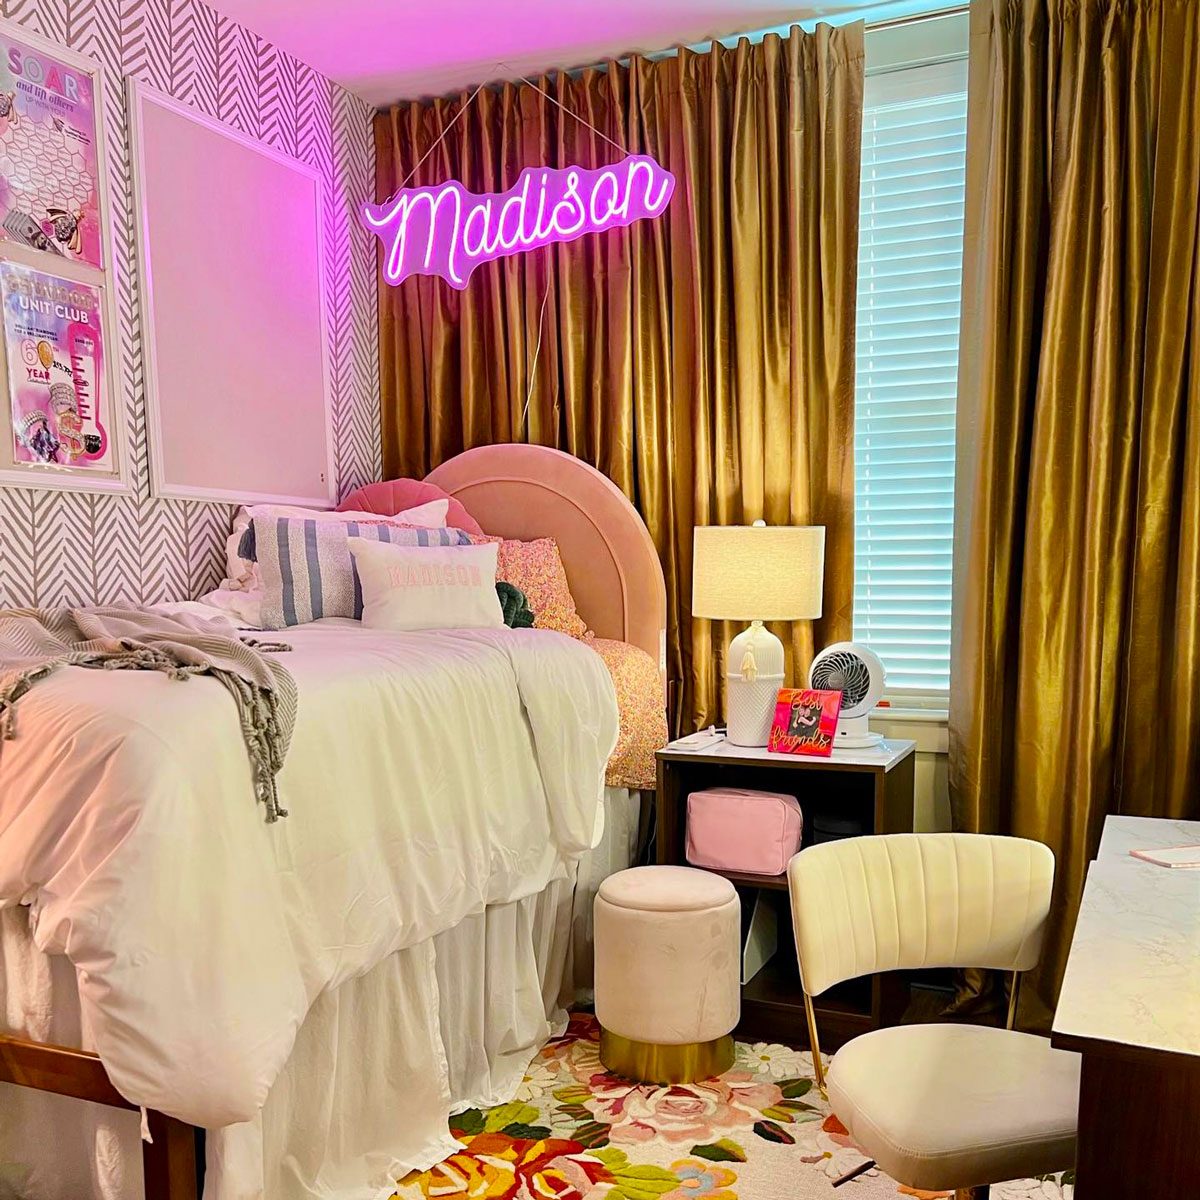 9 Dorm Room Decorating Ideas for the School Year